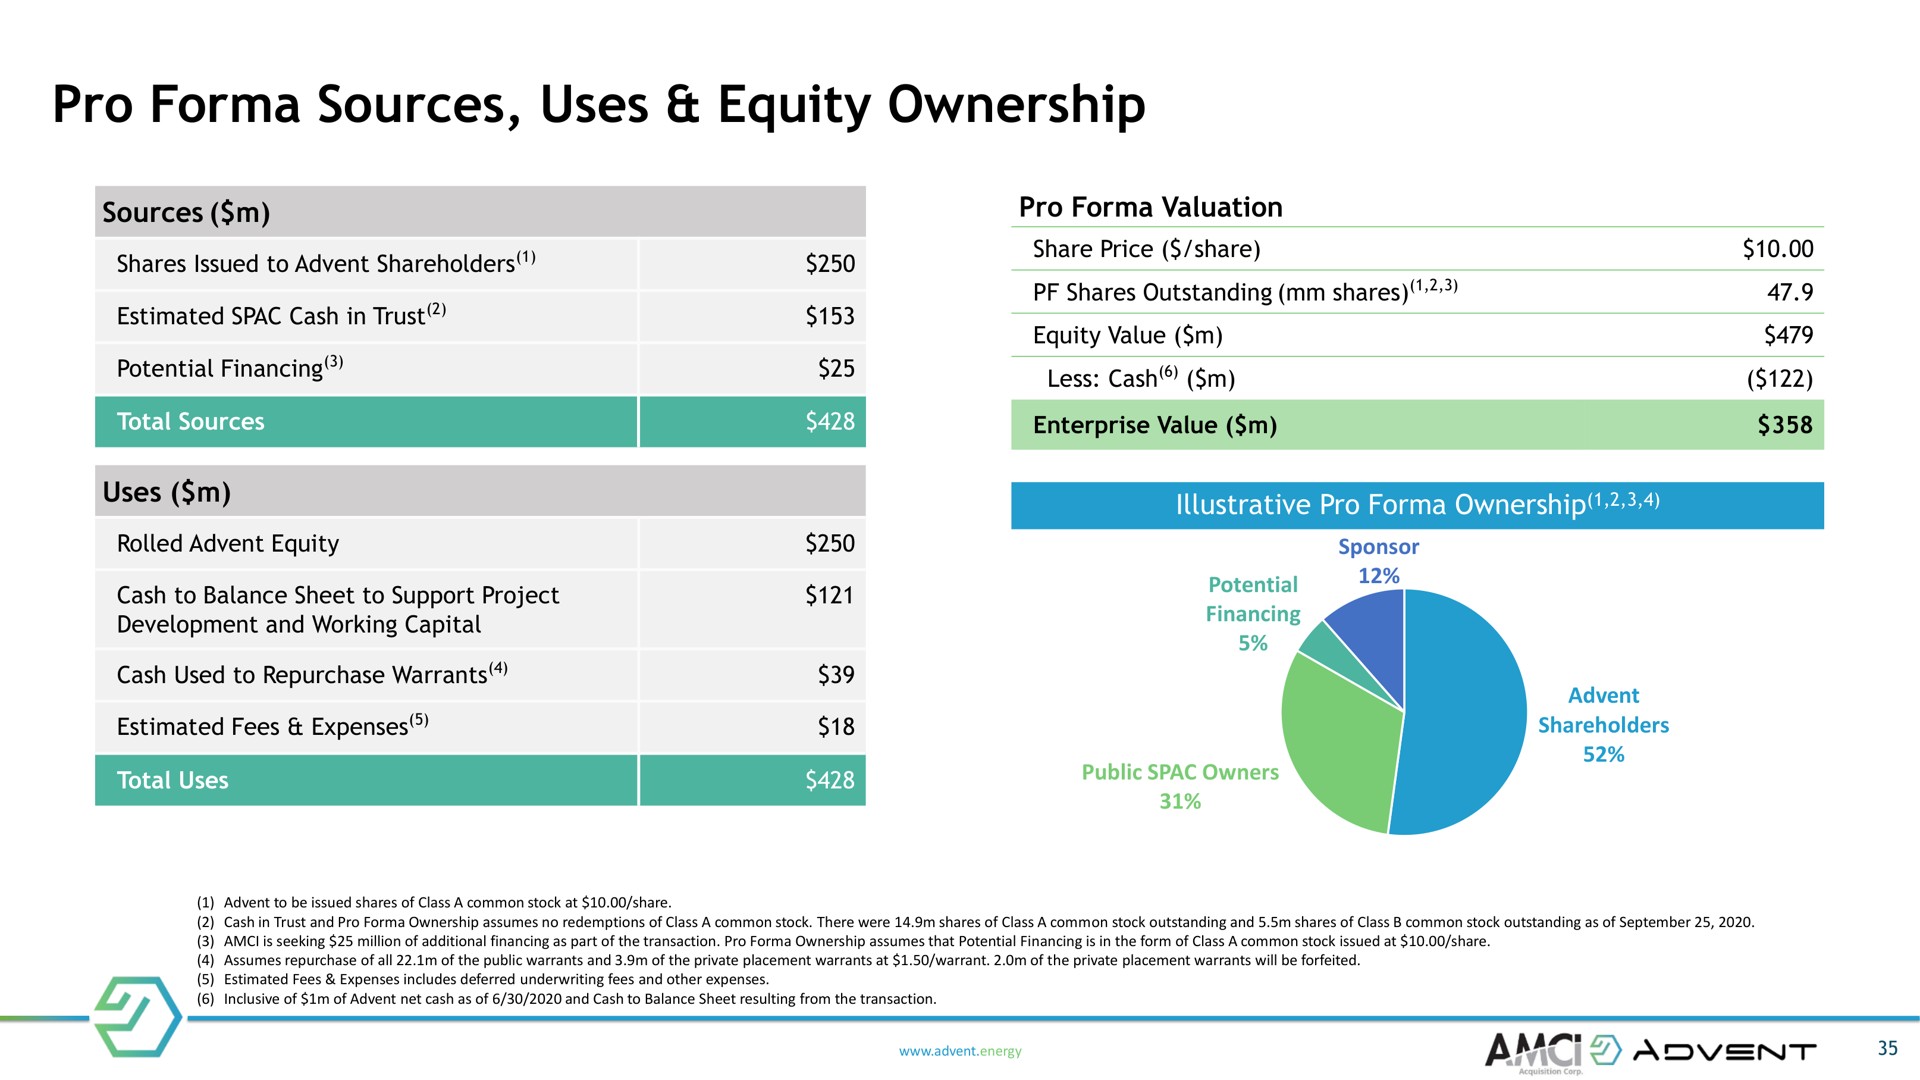 pro sources uses equity ownership shares issued to shareholders estimated cash in trust potential financing total rolled cash to balance sheet to support project development and working capital cash used to repurchase warrants estimated fees expenses total valuation shares outstanding shares value less cash enterprise value illustrative sponsor financing public owners shareholders to be issued shares of class a common stock at share cash in trust and assumes no redemptions of class a common stock there were shares of class a common stock outstanding and shares of class common stock outstanding as of is seeking million of additional financing as part of the transaction assumes that potential financing is in the form of class a common stock issued at share assumes repurchase of all of the public warrants and of the private placement warrants at warrant of the private placement warrants will be forfeited estimated fees expenses includes deferred underwriting fees and other expenses inclusive of of net cash as of and cash to balance sheet resulting from the transaction energy a a | Advent